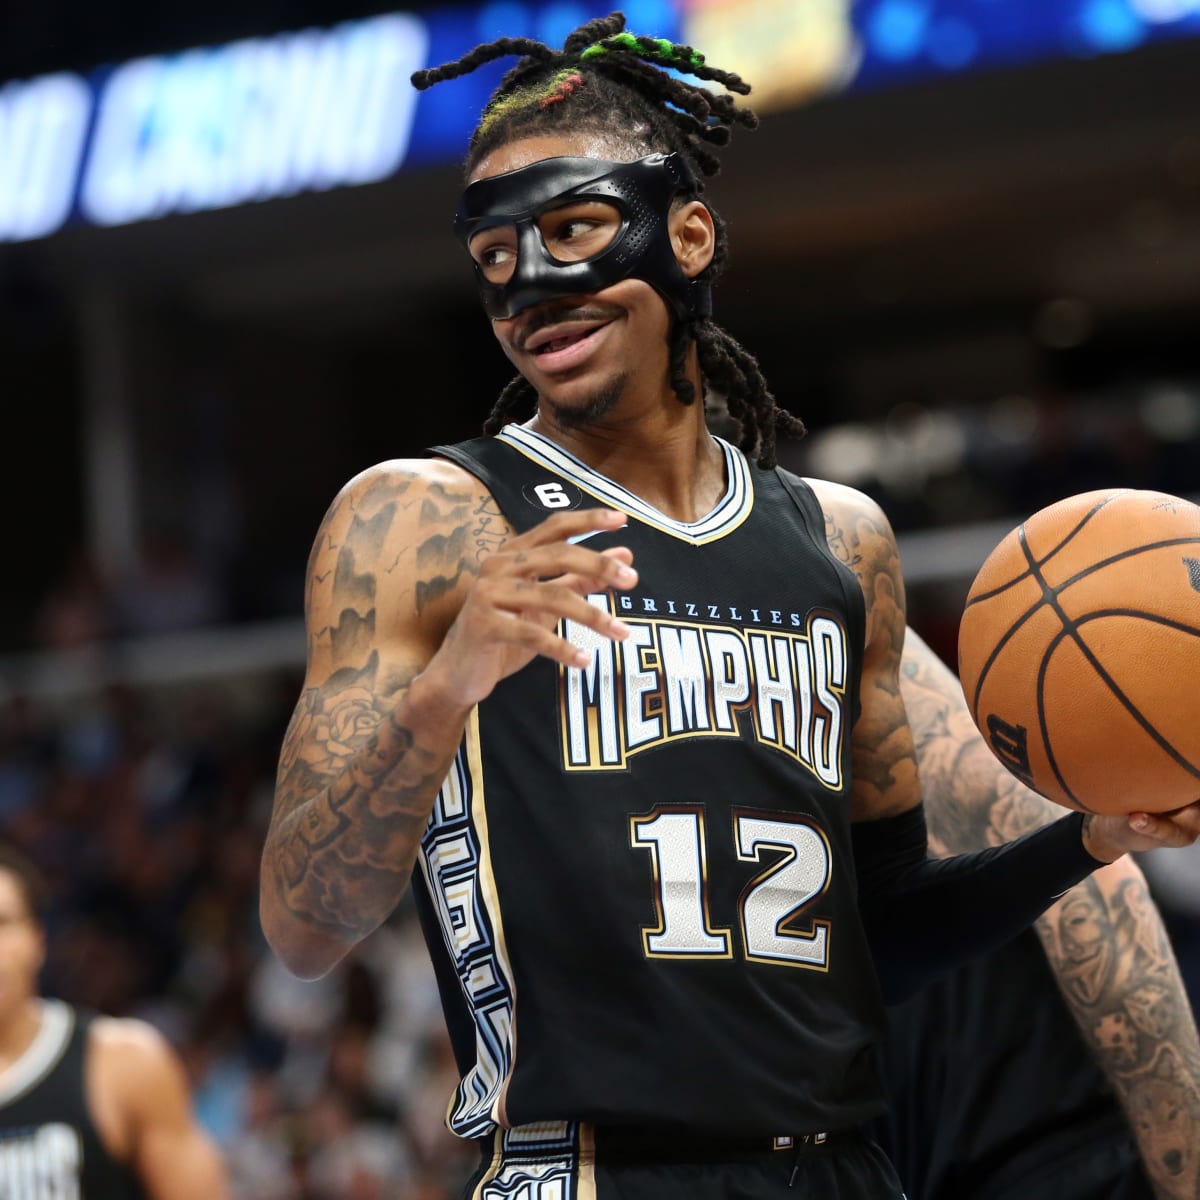 Ja Morant Raps NBA YoungBoy Lyrics, His First Game Back From Suspensio